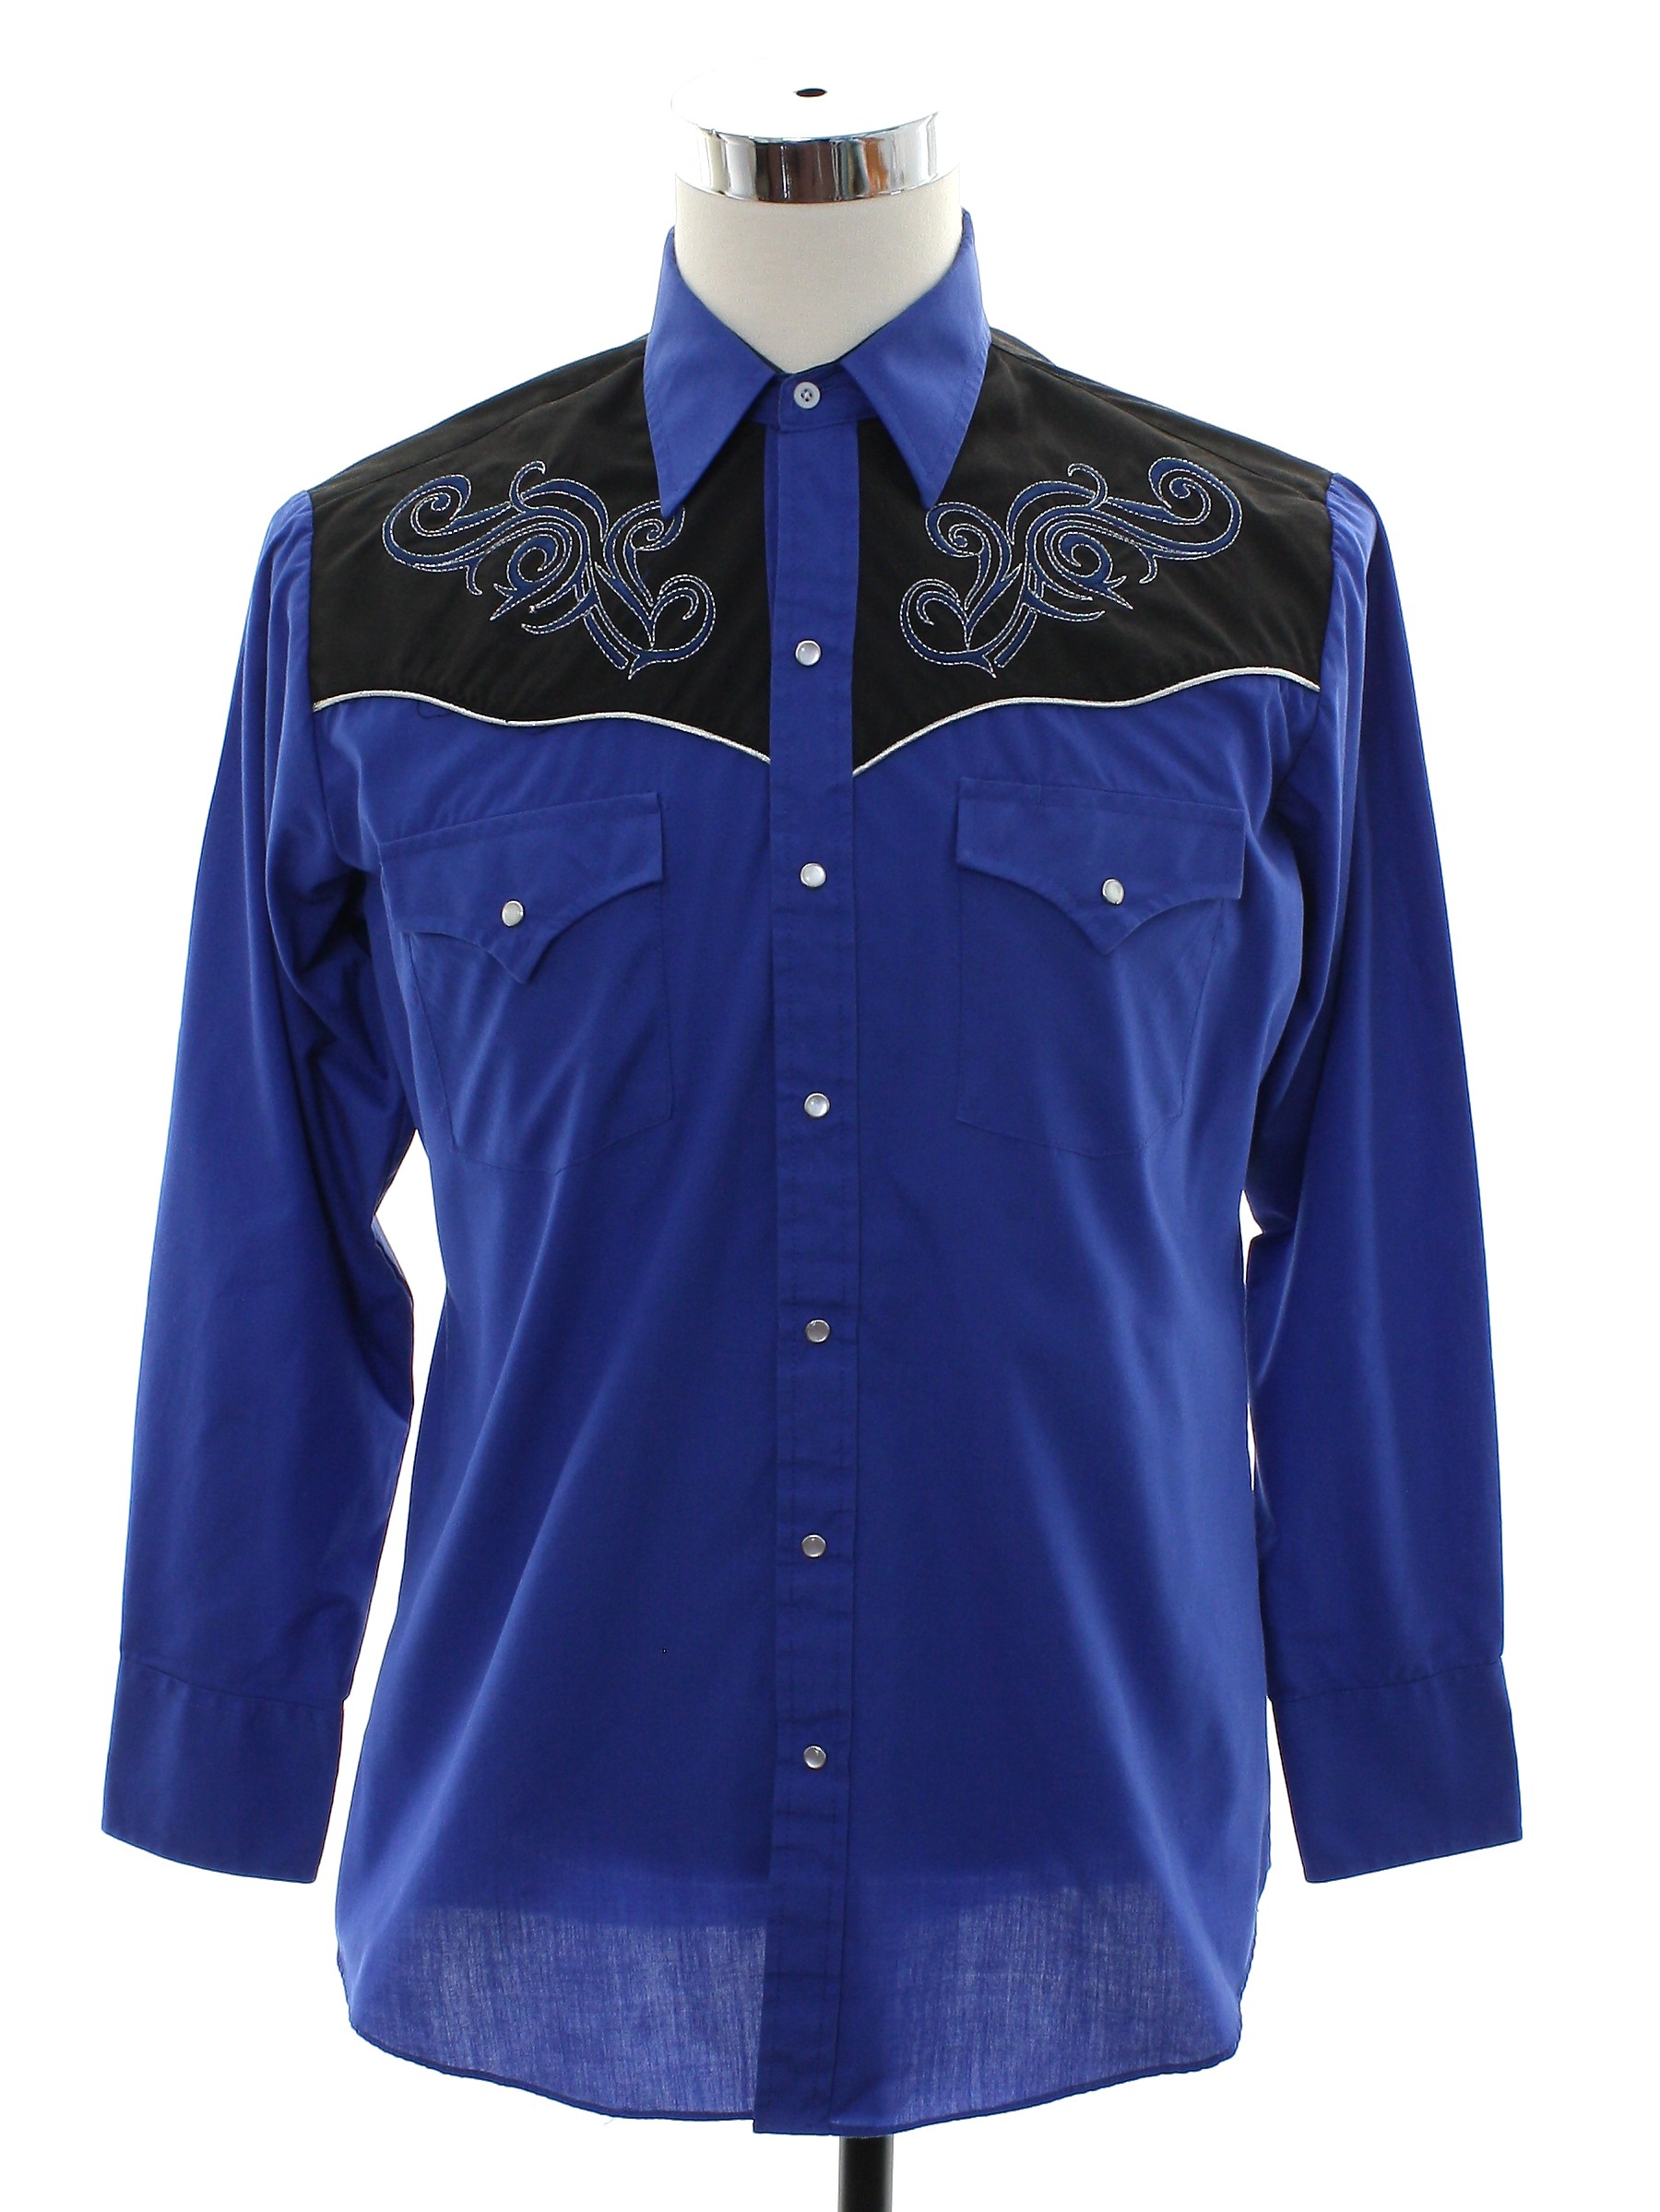 Western Shirt: 90s -Ely Cattleman- Mens blue background polyester ...